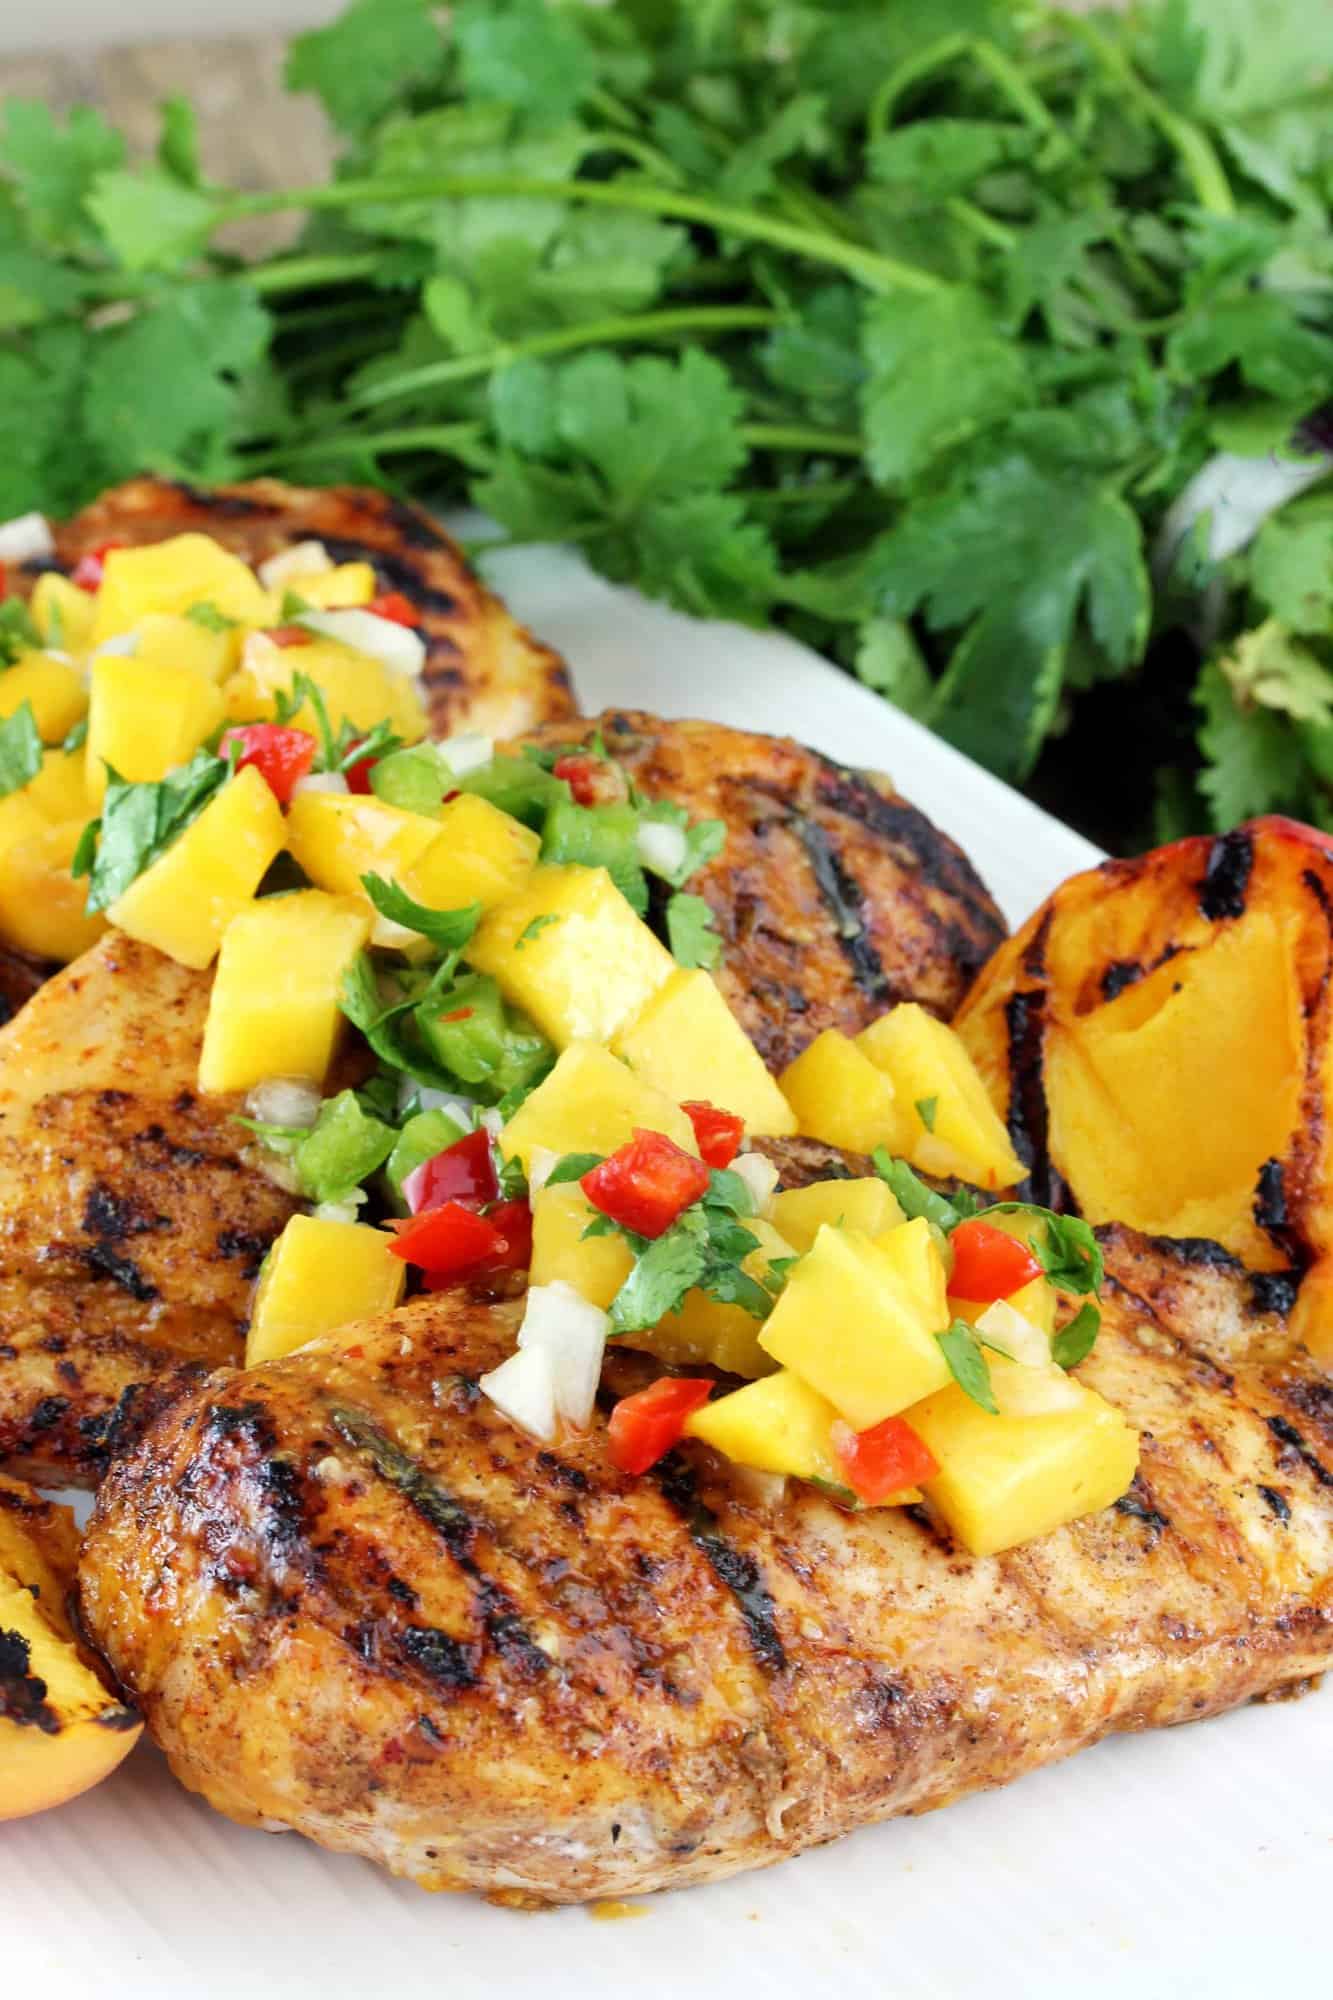 Chicken is grilled to perfection with a spicy peach glaze and then topped off with a fresh peach salsa in this Chipotle-Peach Glazed Grilled Chicken Breast.